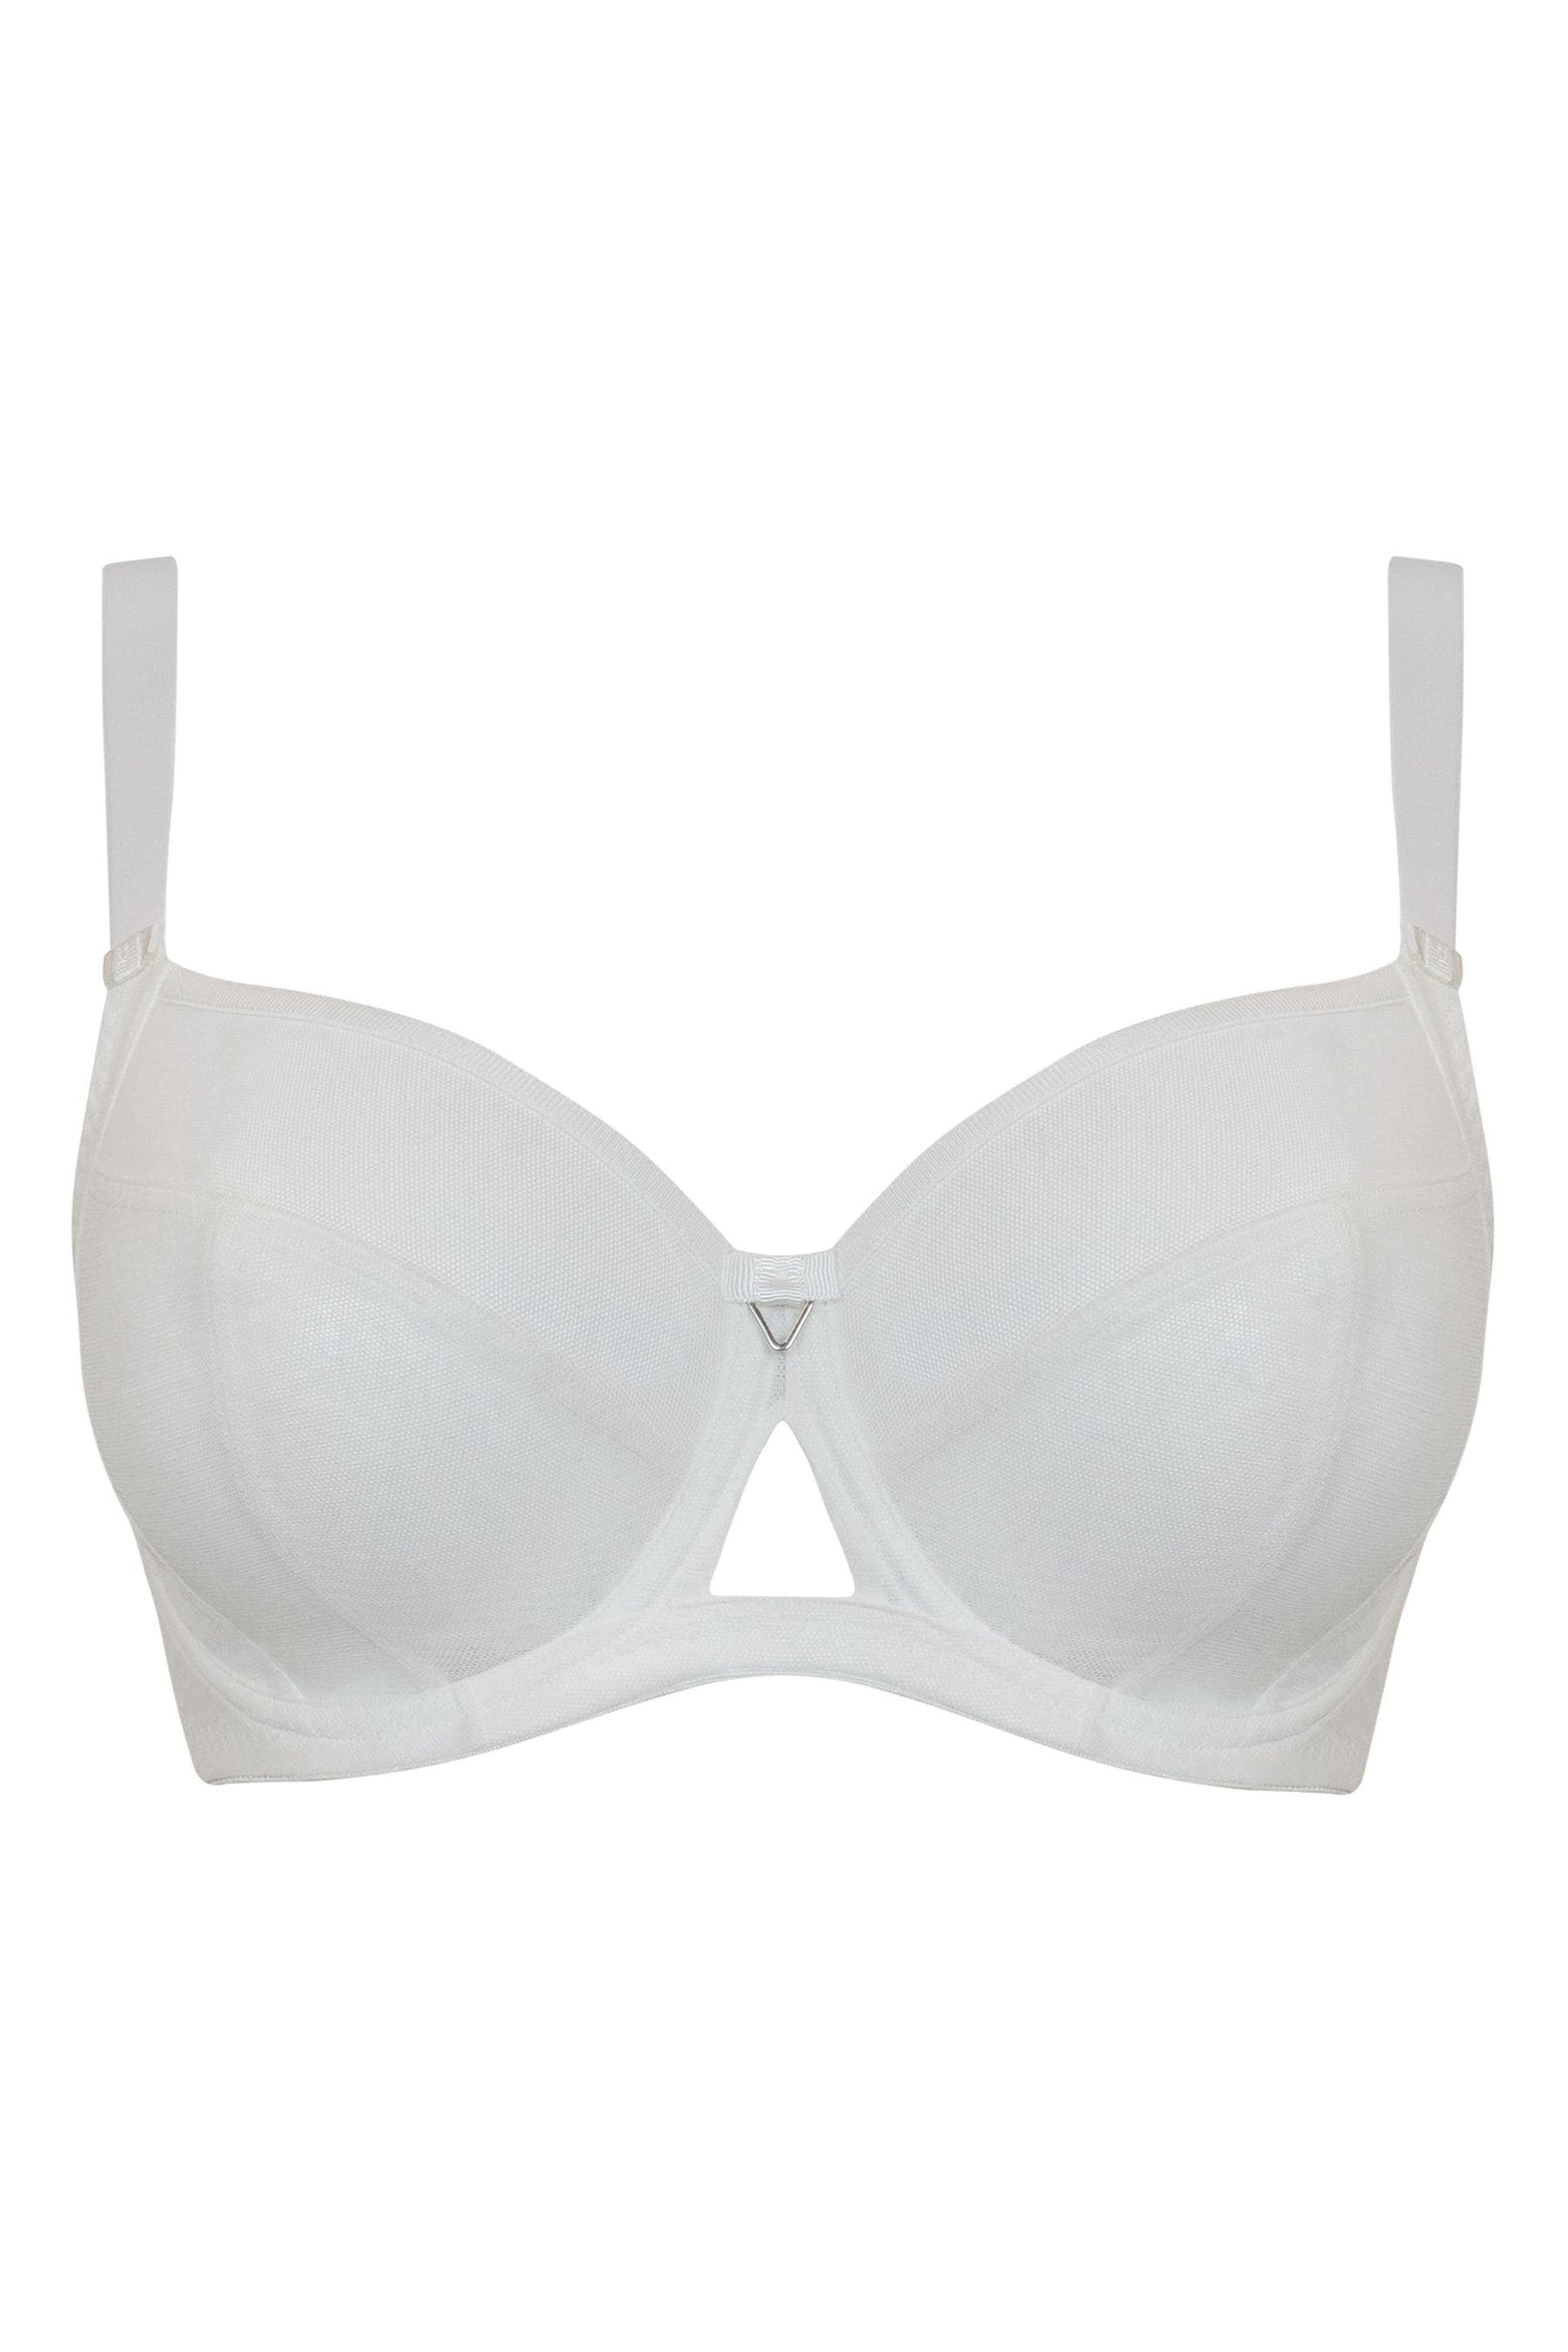 Buy Curvy Kate Victory Side Support Balcony Bra from the Next UK online ...